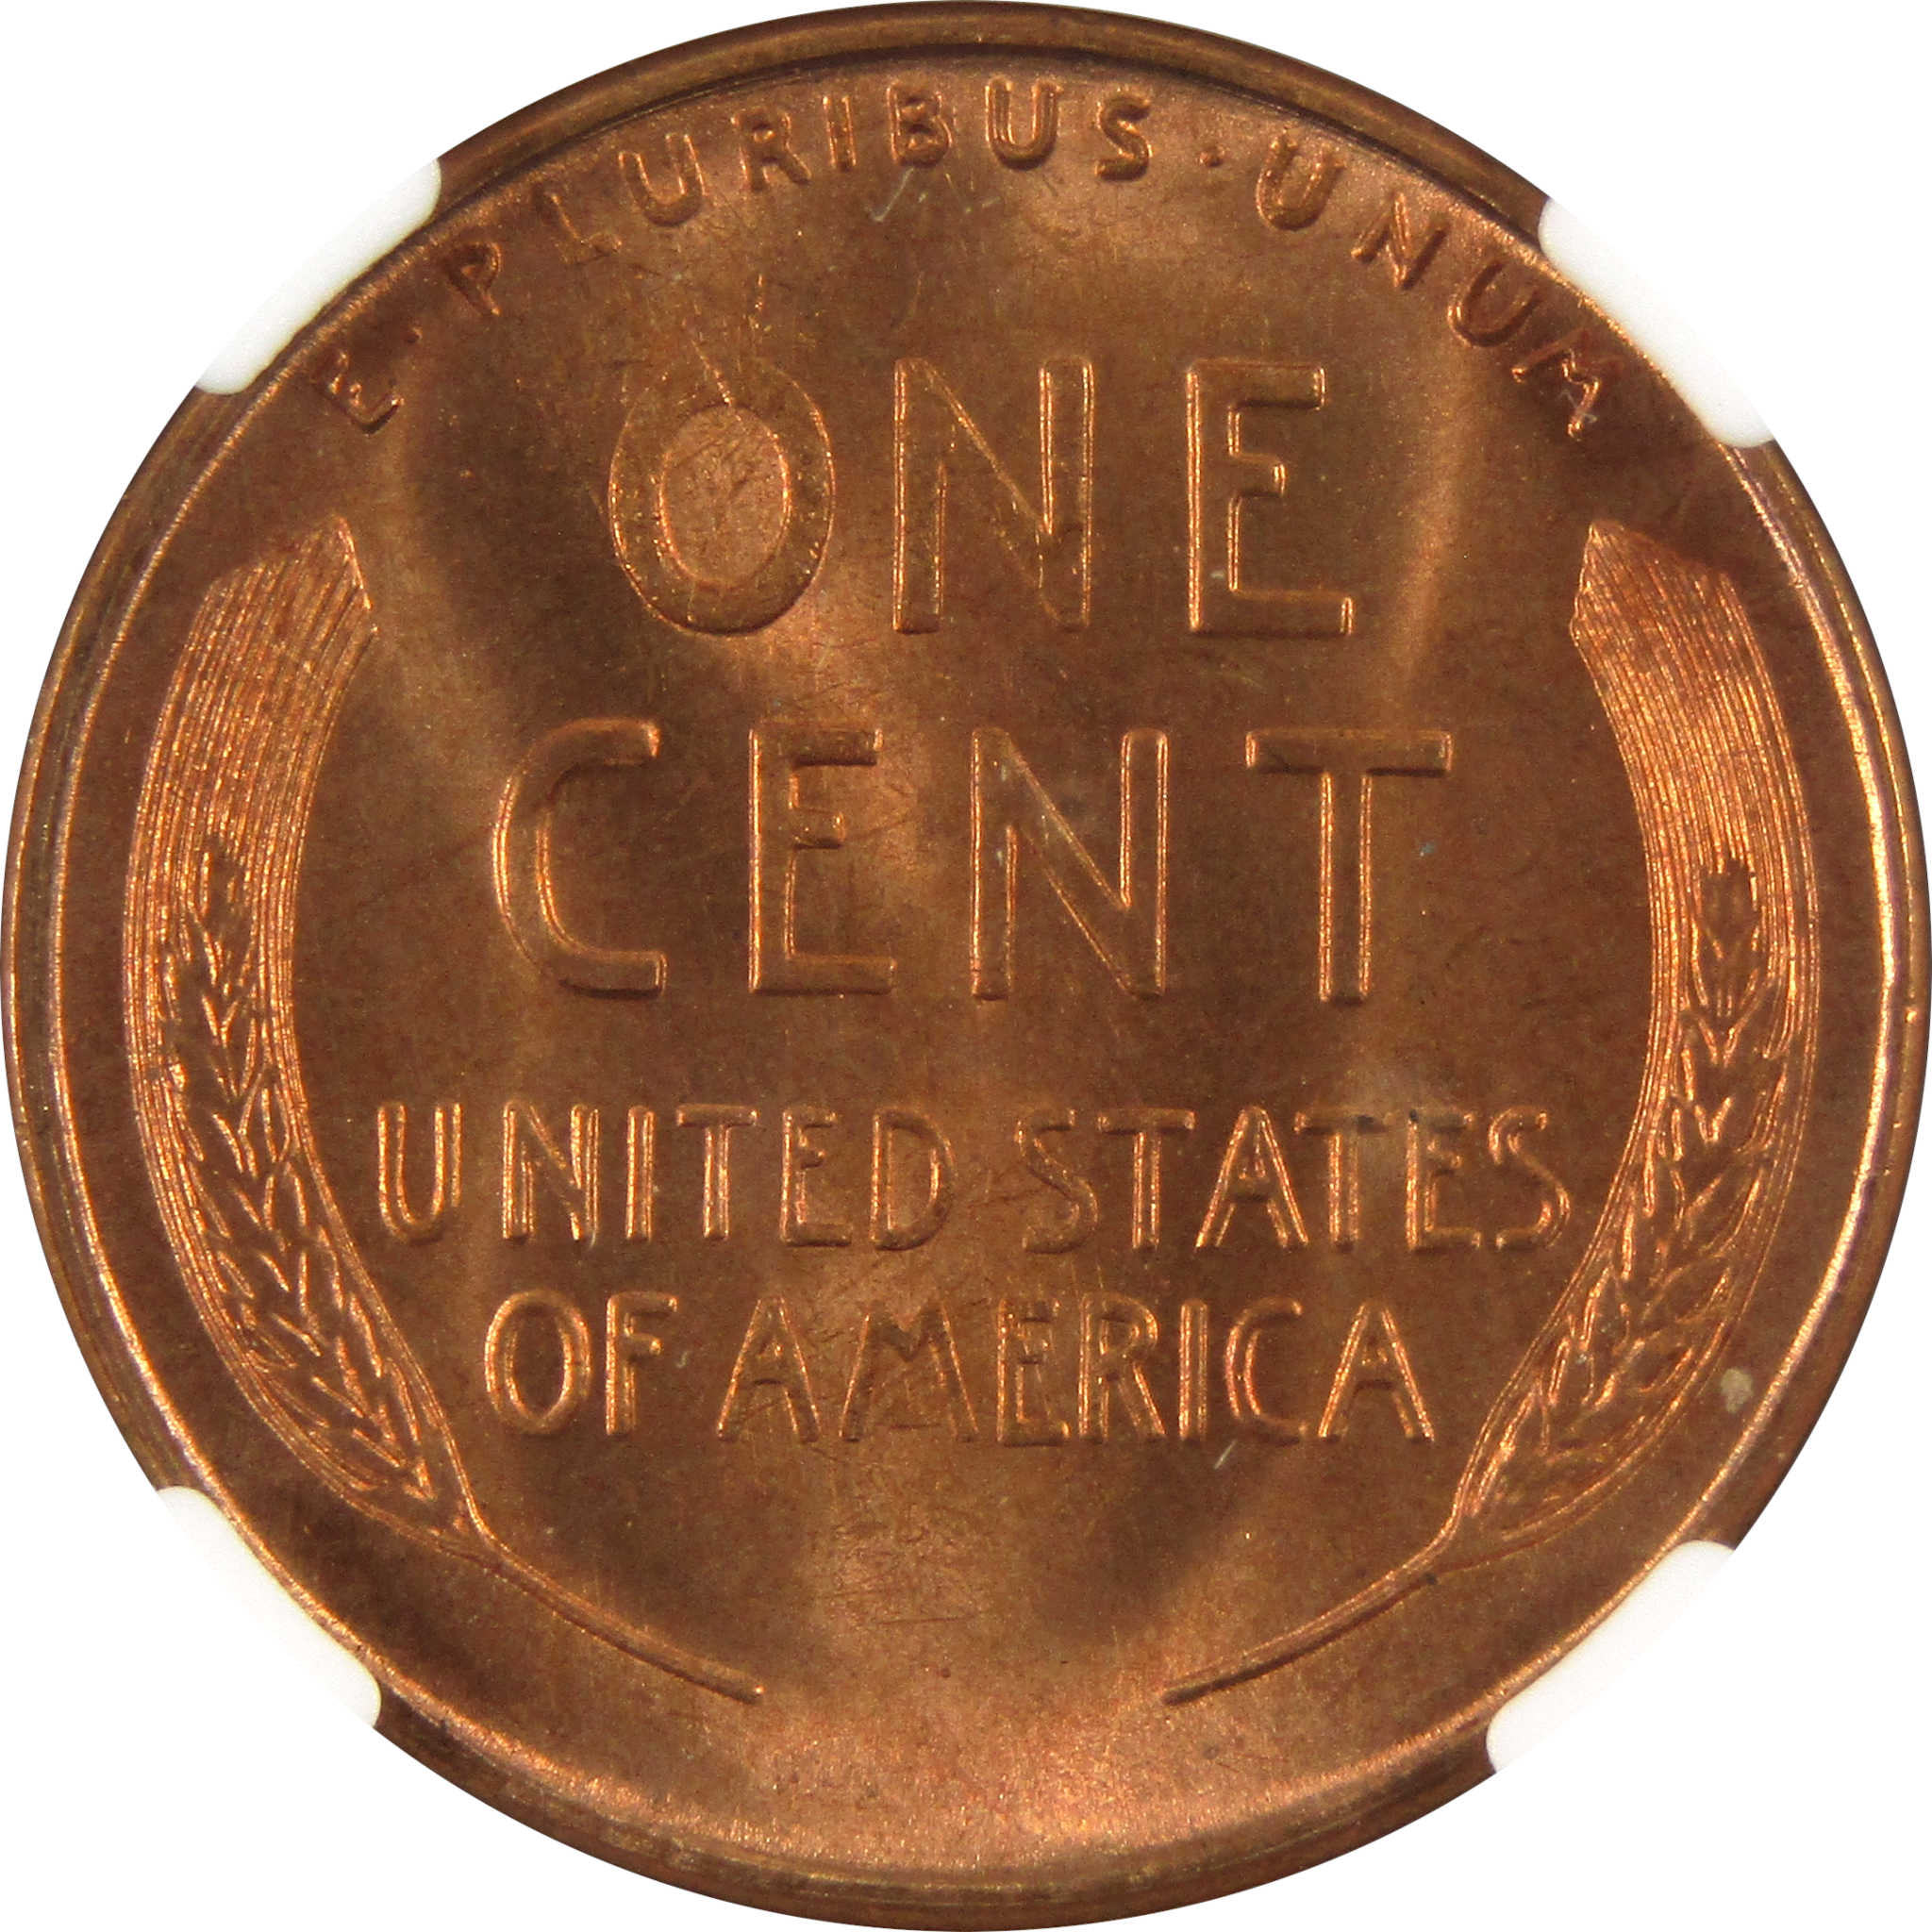 1947 S Lincoln Wheat Cent MS 66 RD NGC Penny 1c Uncirculated SKU:I9693